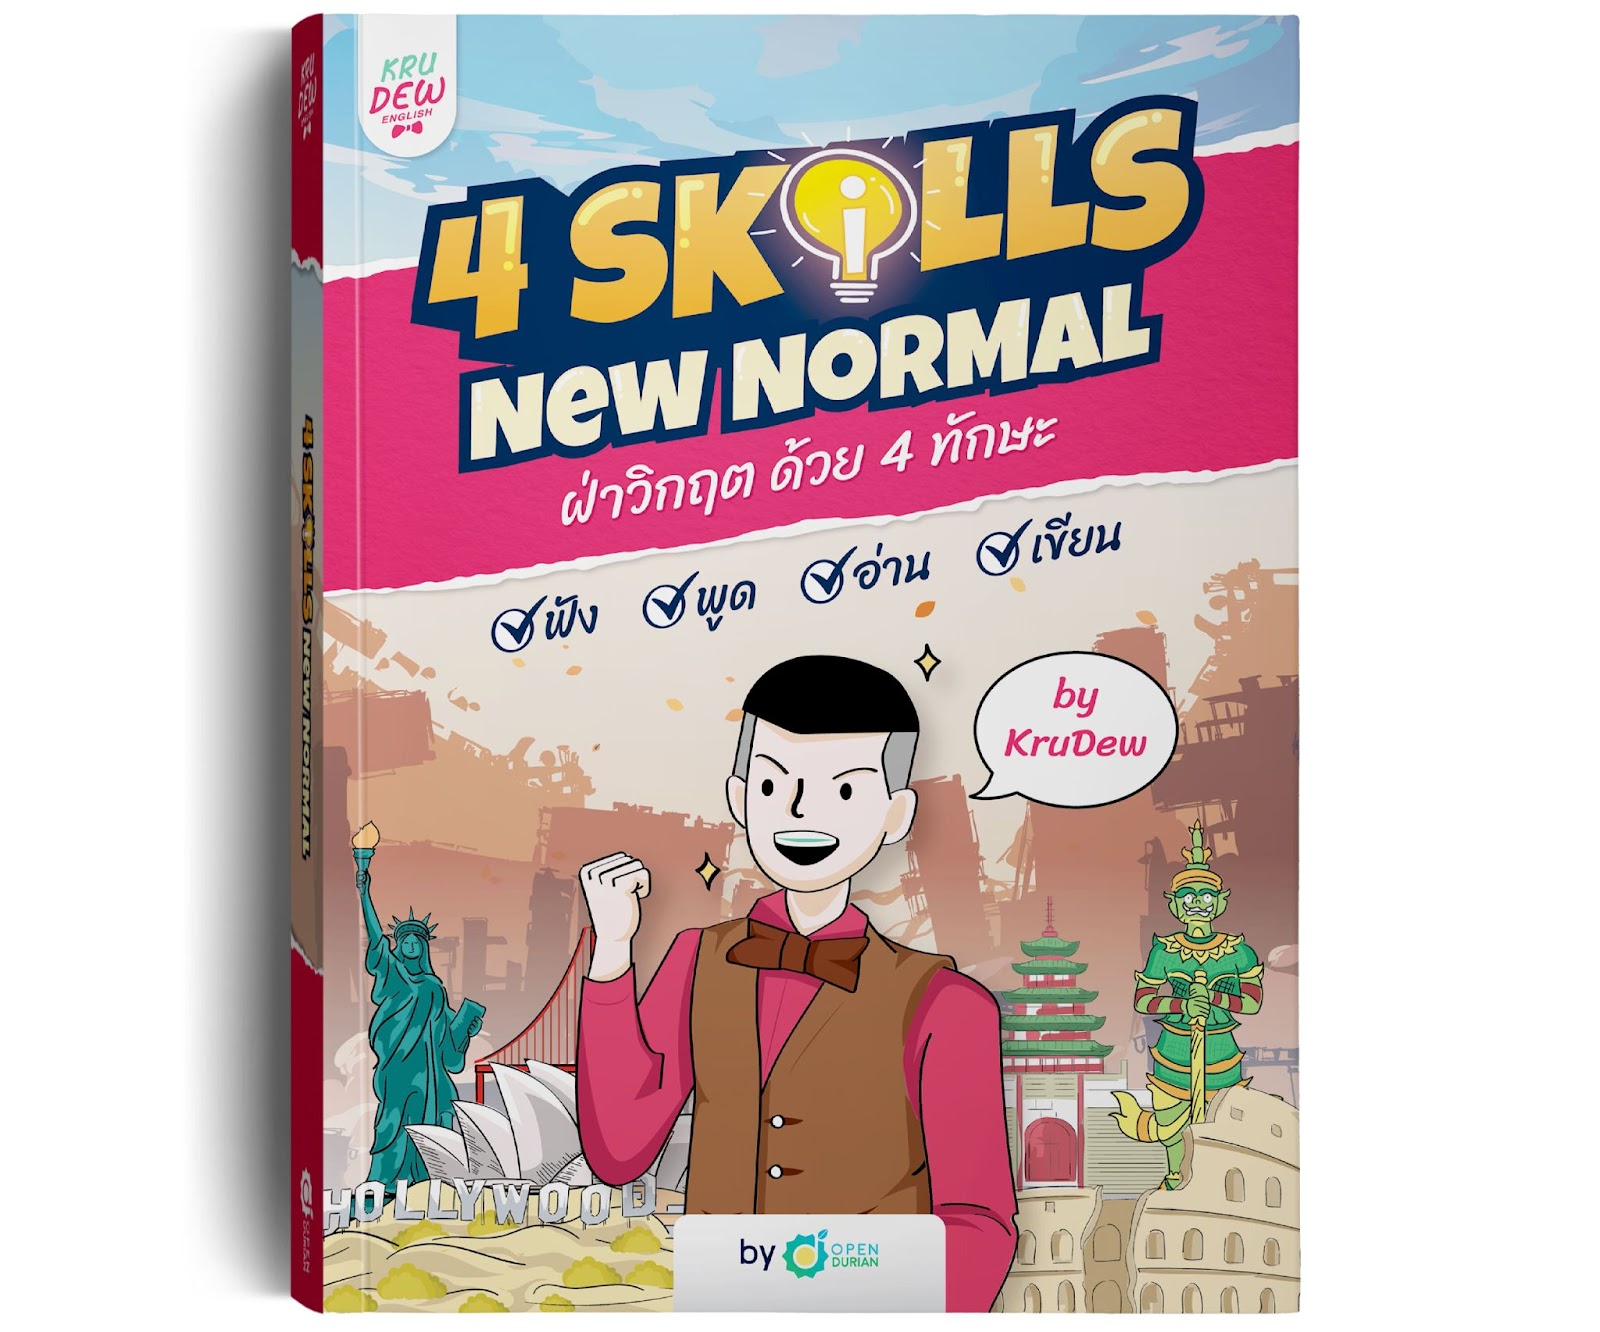 a book titled 4 SKILLS NEW NORMAL with a graphic illustration on cover